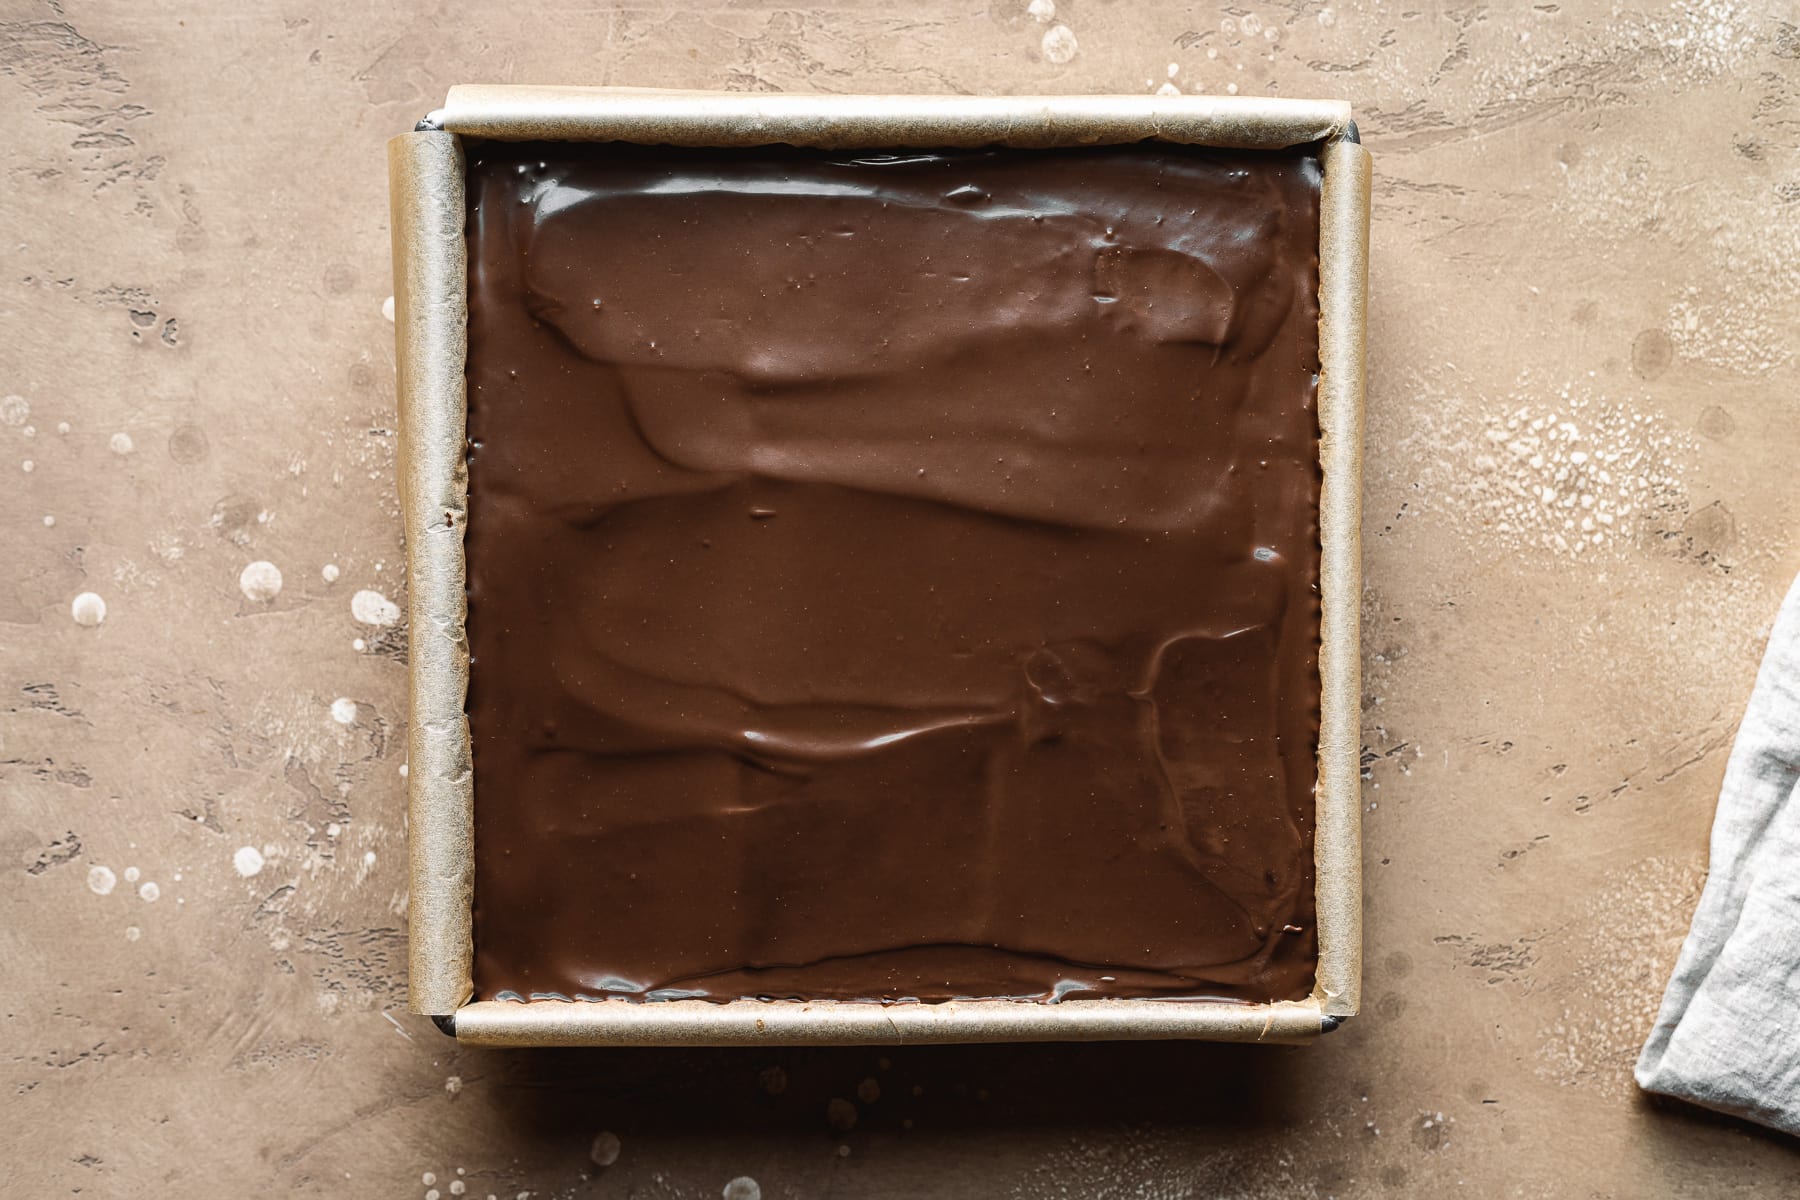 A recipe process photo showing a top layer of dark chocolate ganache in a square pan. The pan sits on a tan textured stone surface.